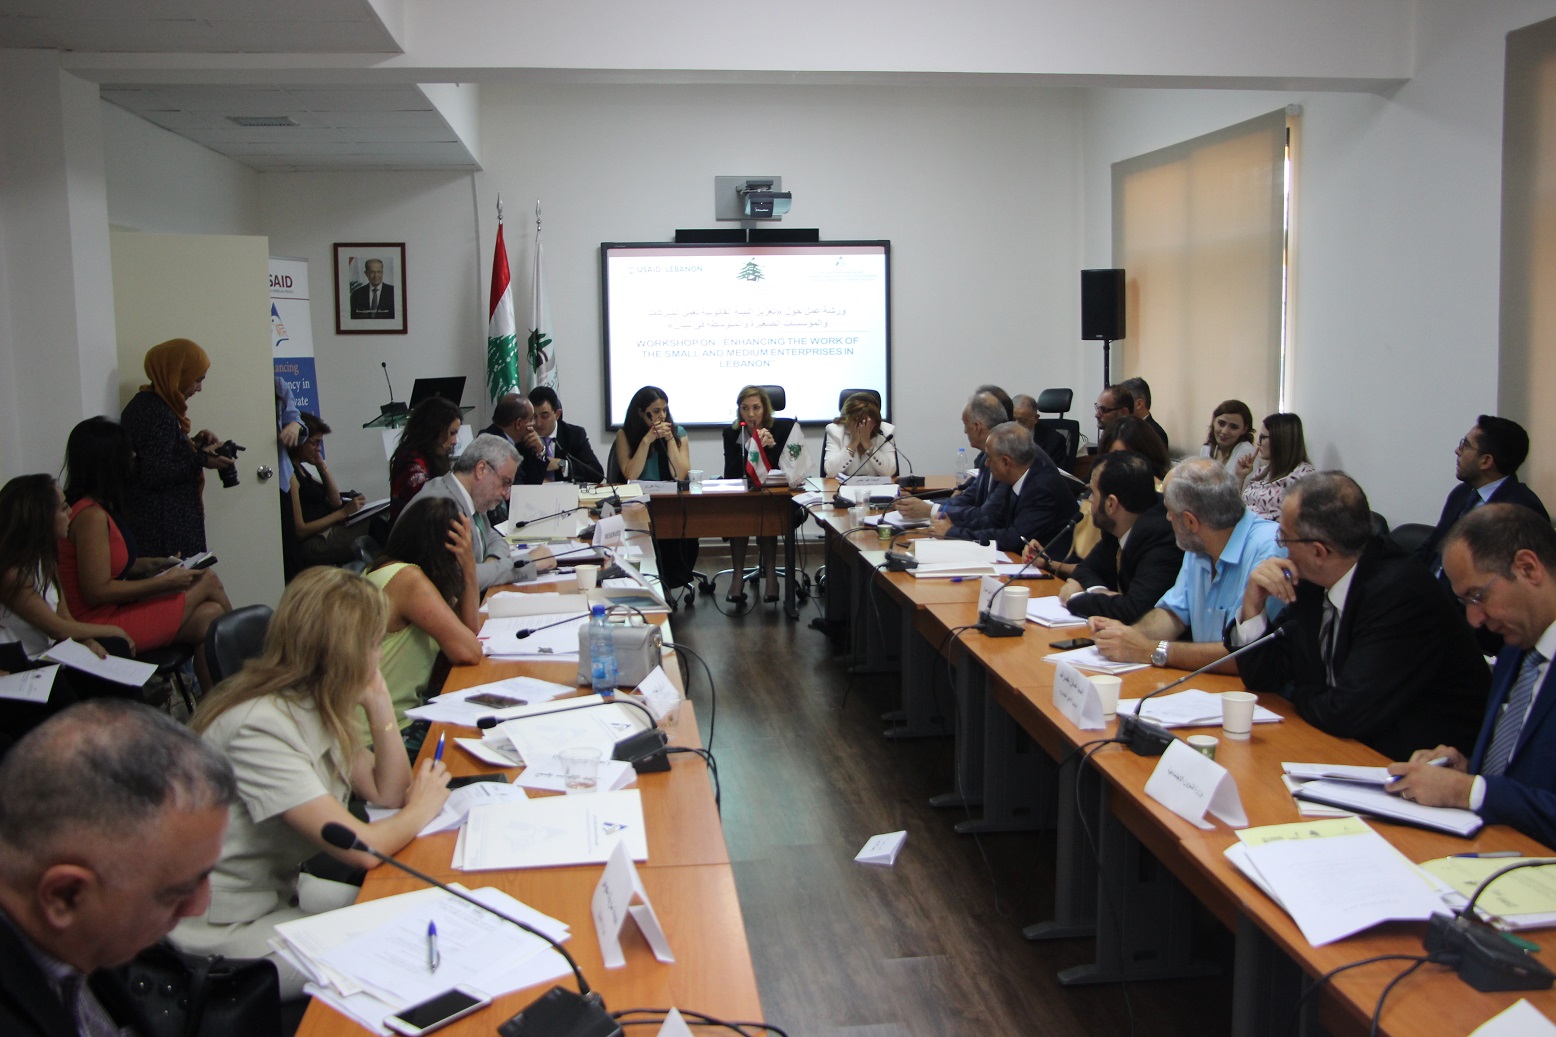 Workshop on Enhancing the Work of the Small and Medium Enterprises in Lebanon